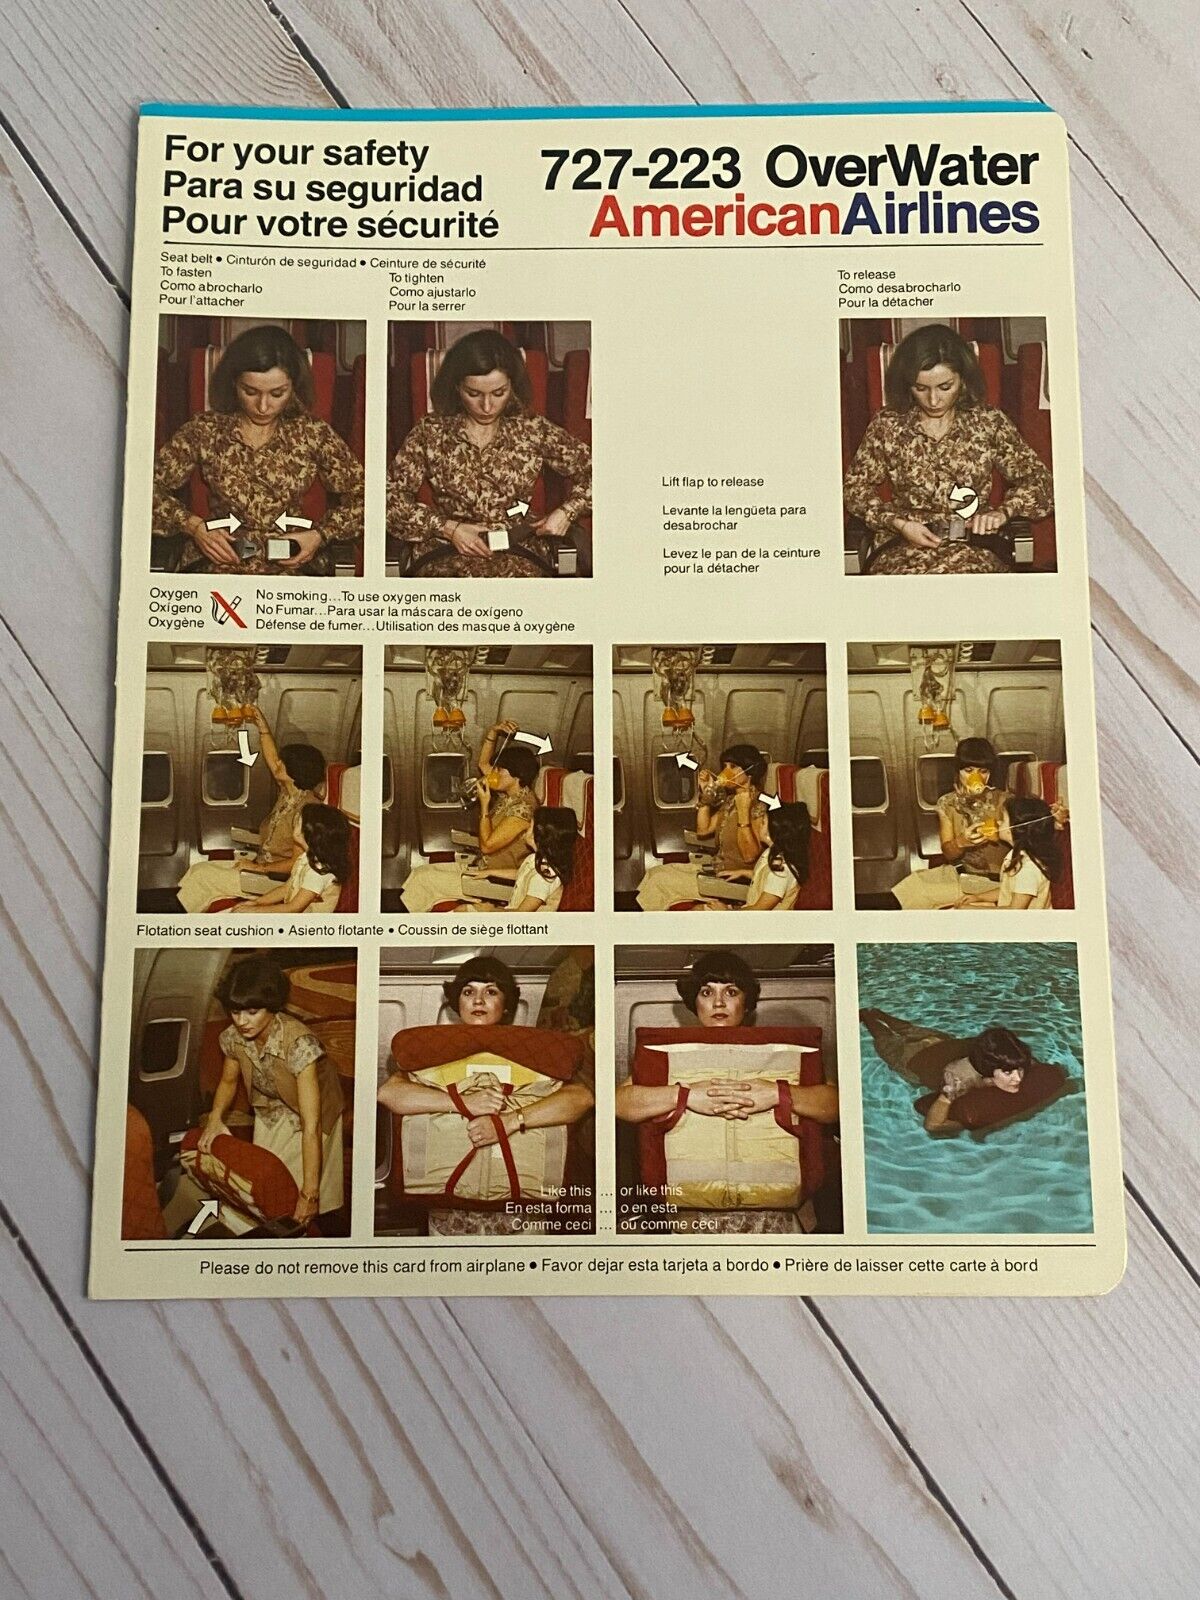 American Airlines Boeing 727-223 OverWater Safety Card - 1981